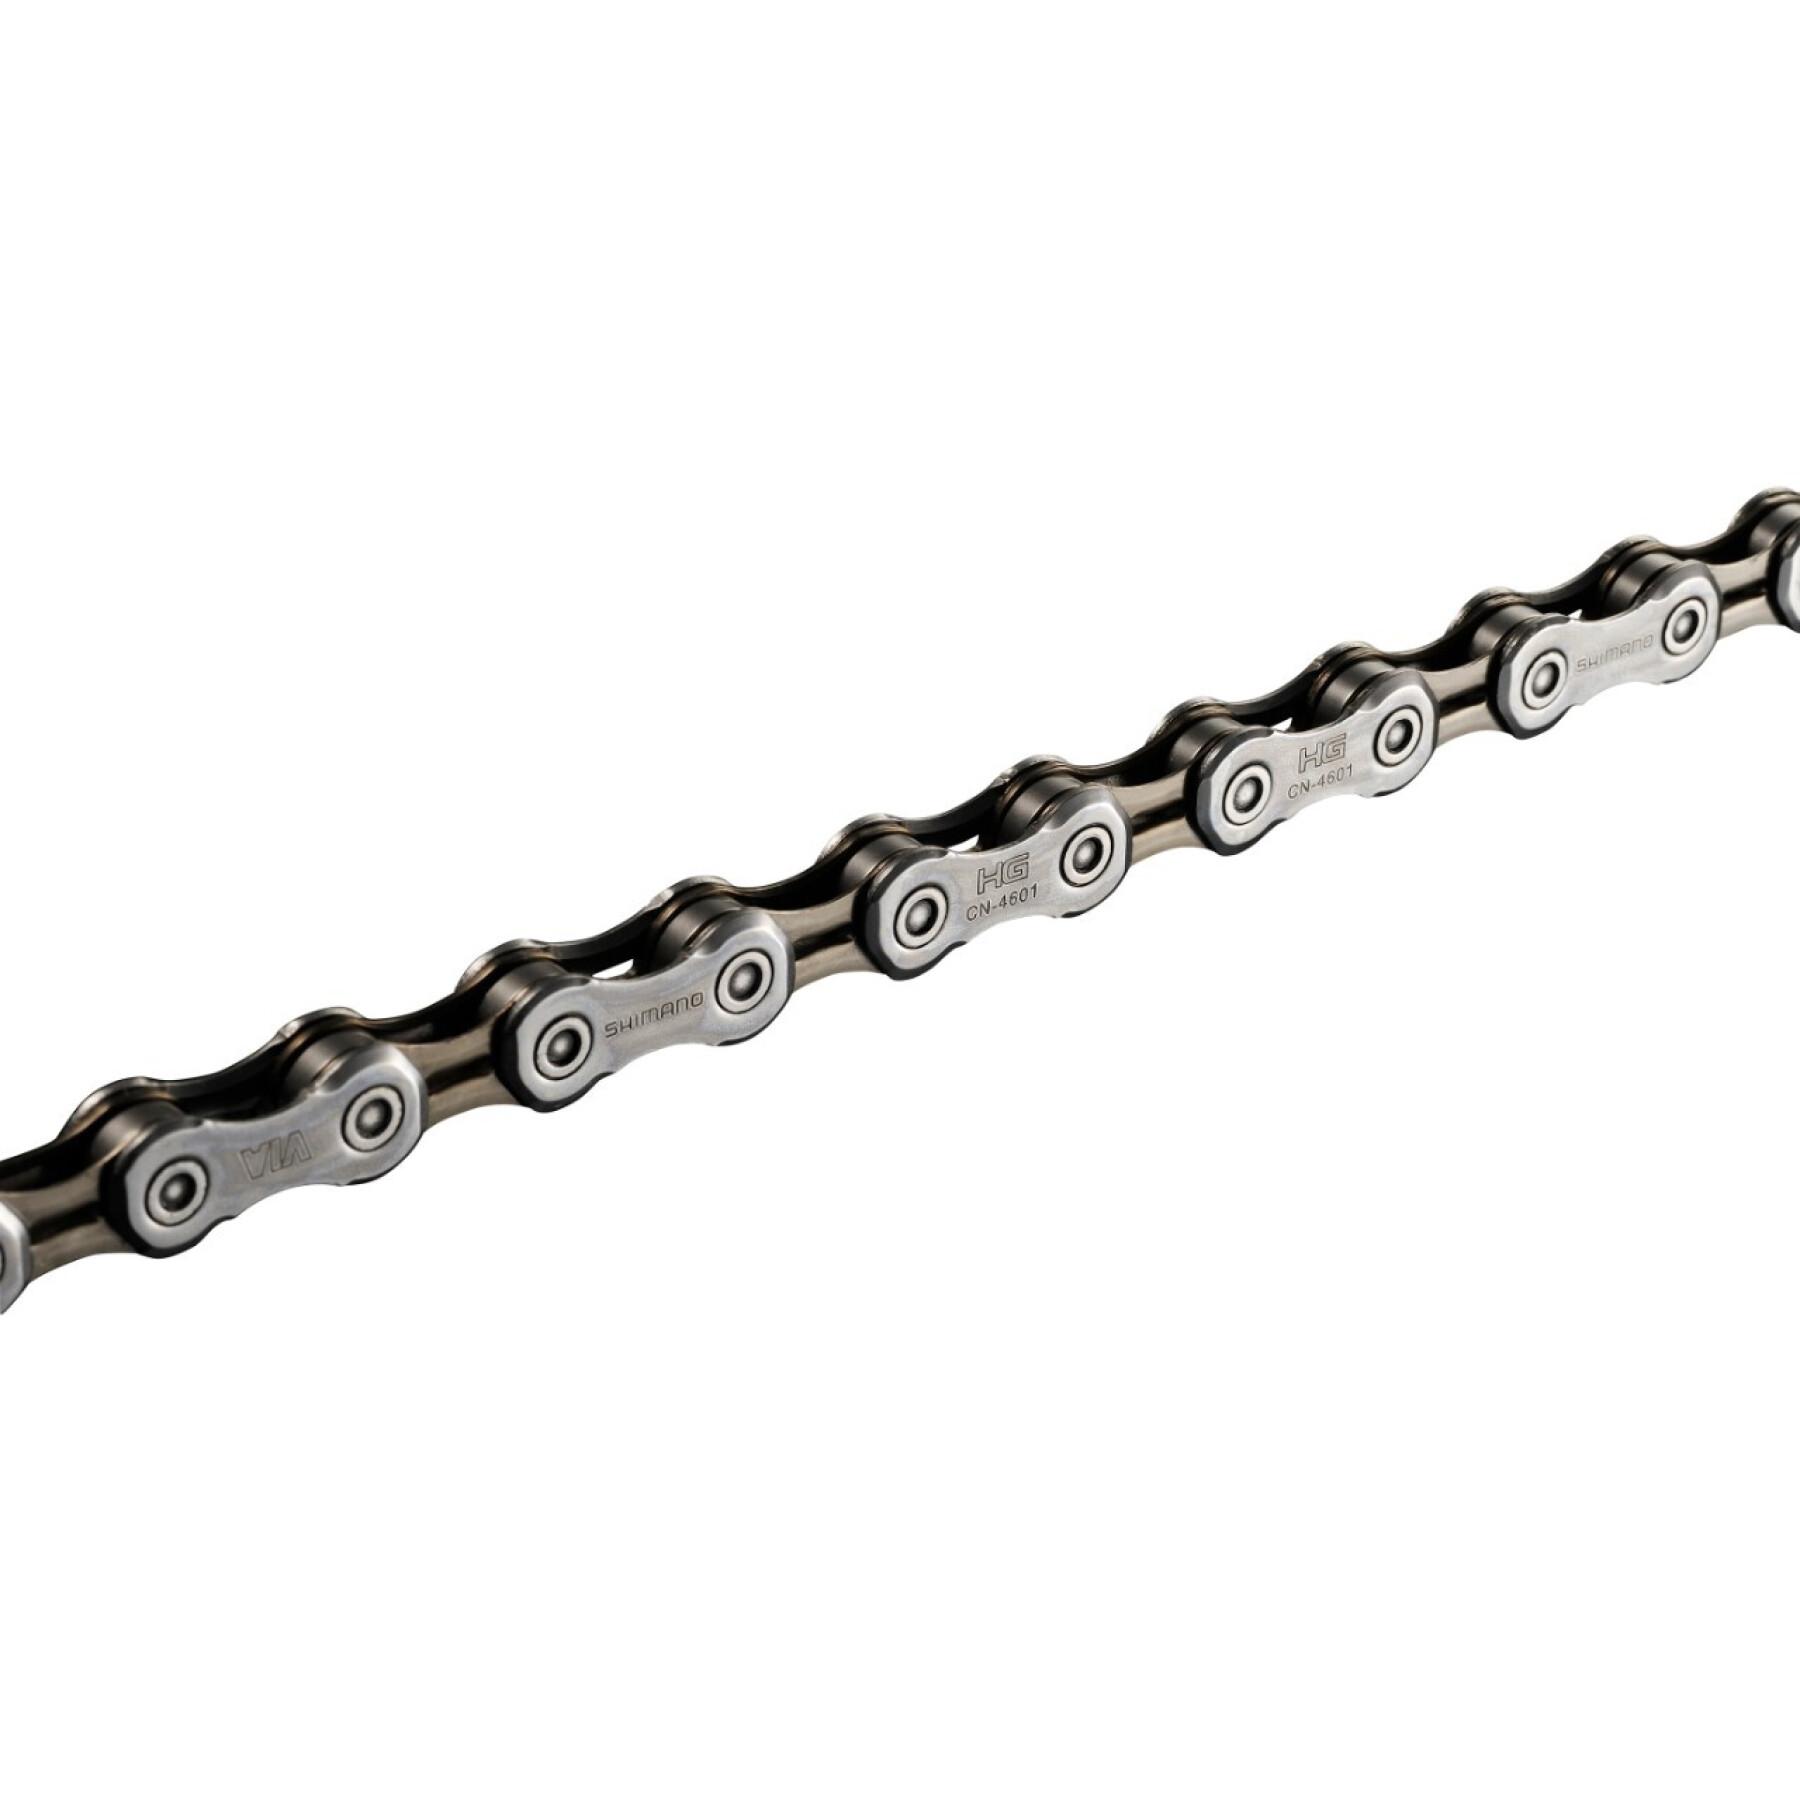 10-speed bicycle chain Shimano CN-4601 HG